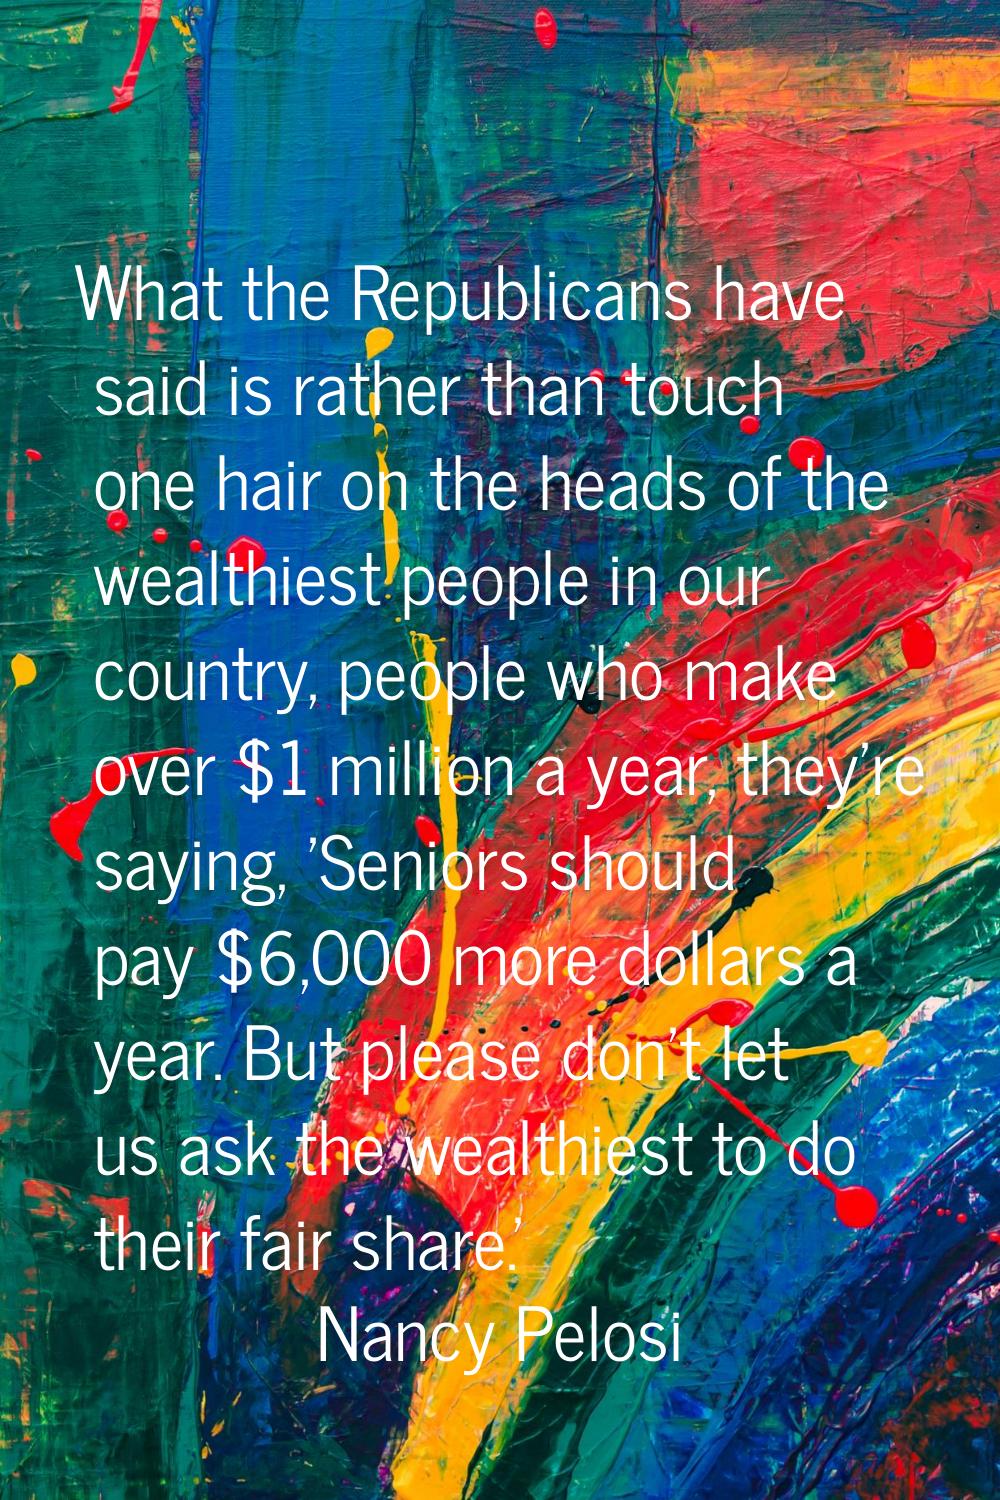 What the Republicans have said is rather than touch one hair on the heads of the wealthiest people 